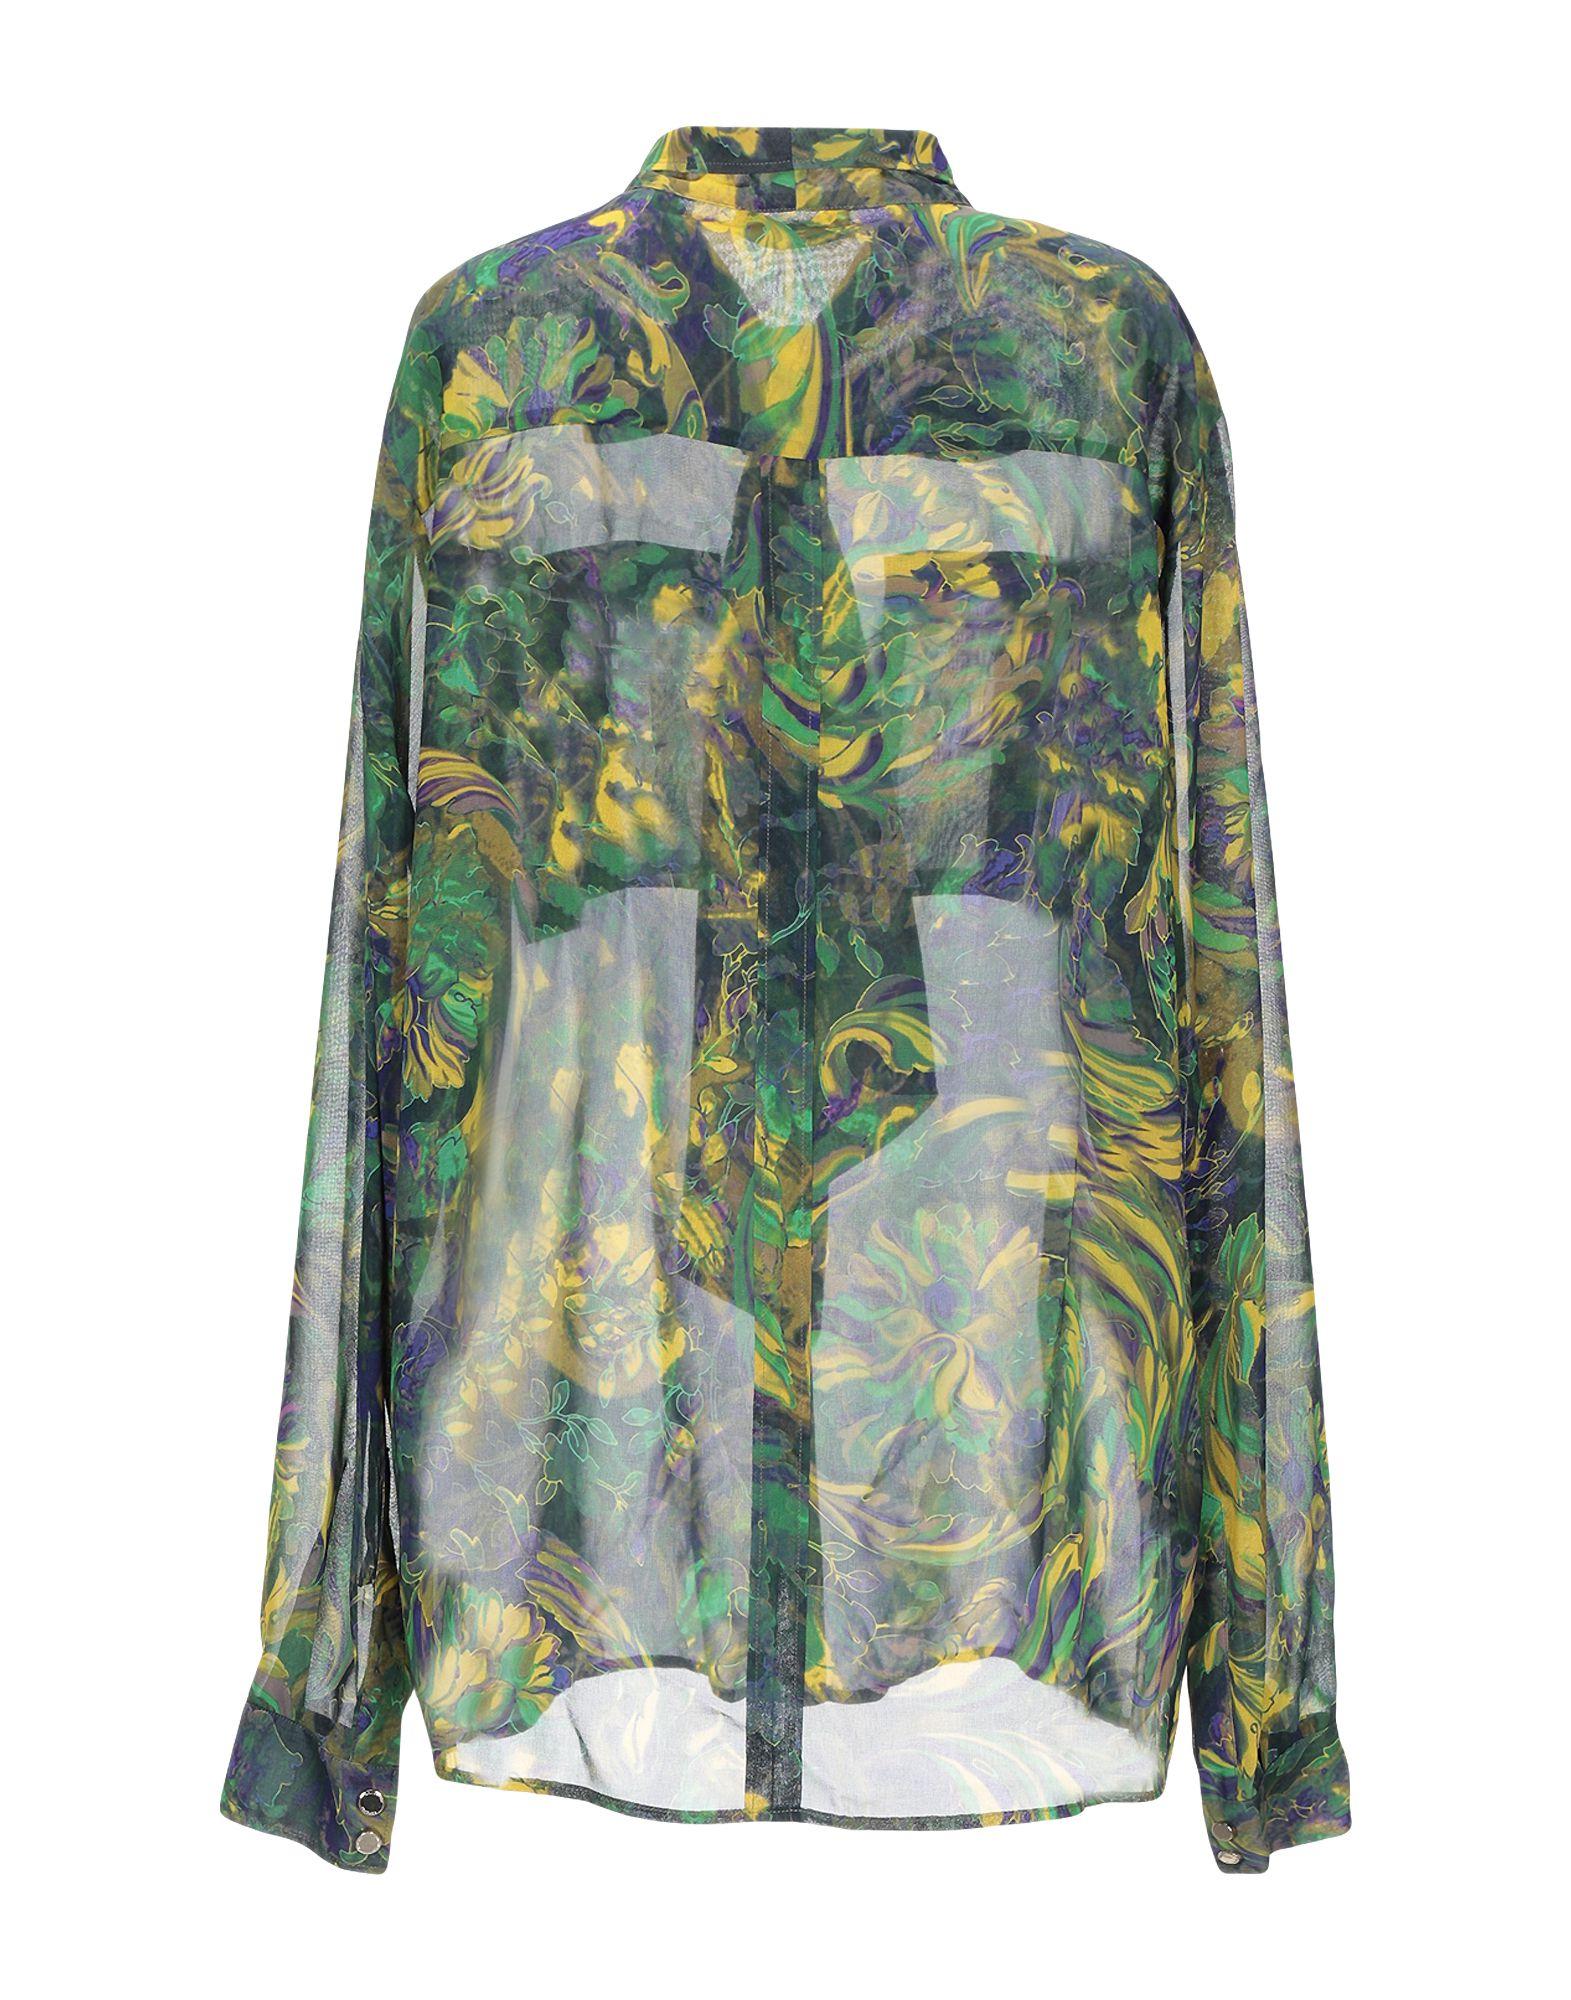 Versace Synthetic Shirt in Military Green (Green) - Lyst